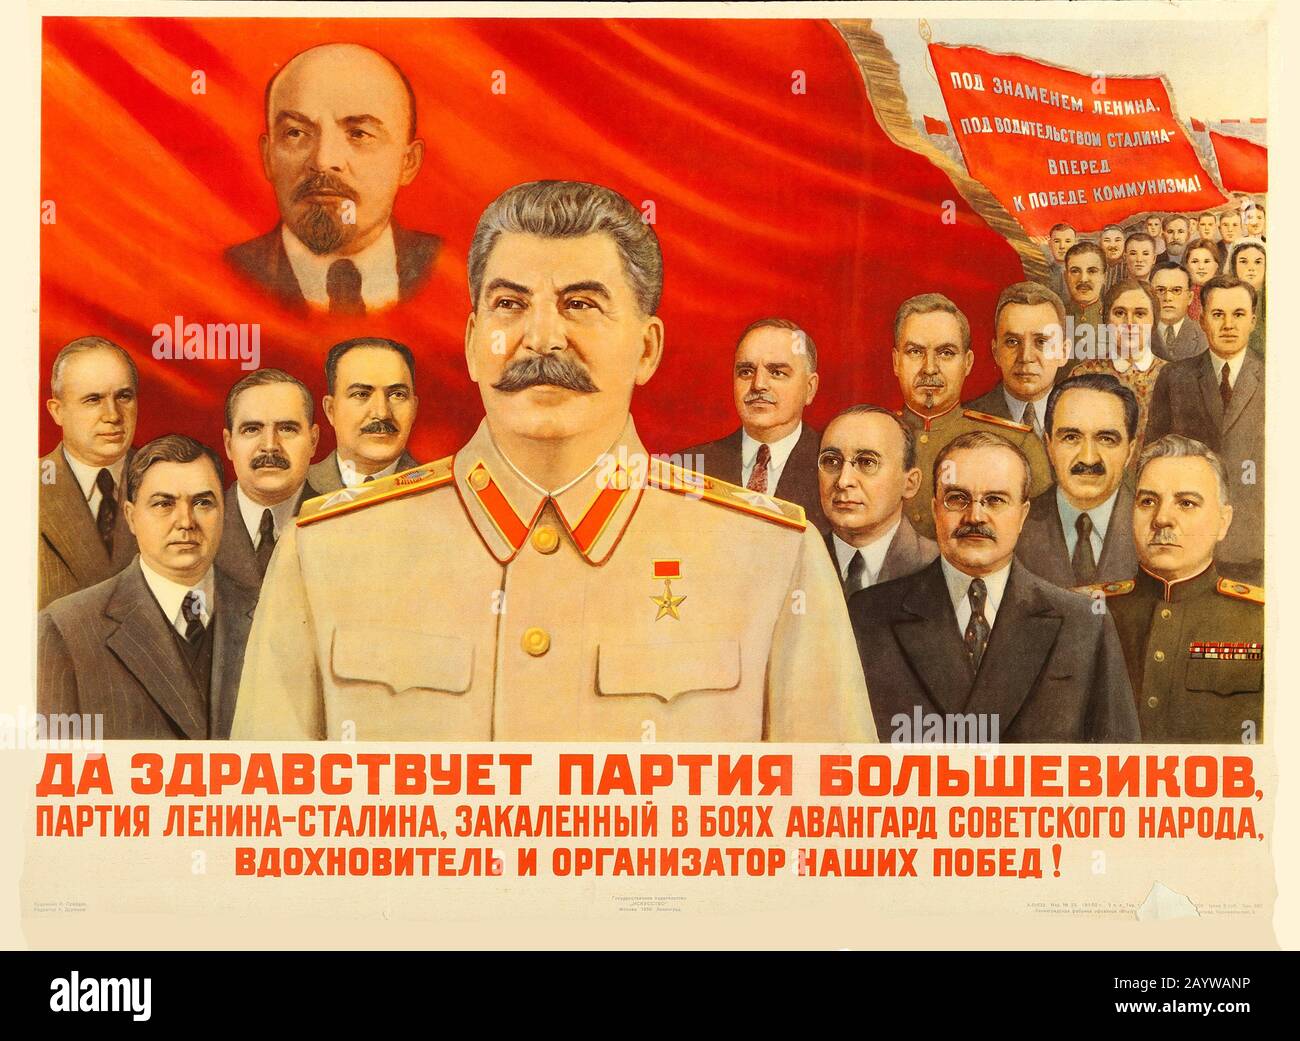 Long live the Bolshevik Party, the Party of Lenin and Stalin, the Seasoned Vanguard of the Soviet People!. Museum: PRIVATE COLLECTION. Author: Vladislav Grigoryevich Pravdin. Stock Photo